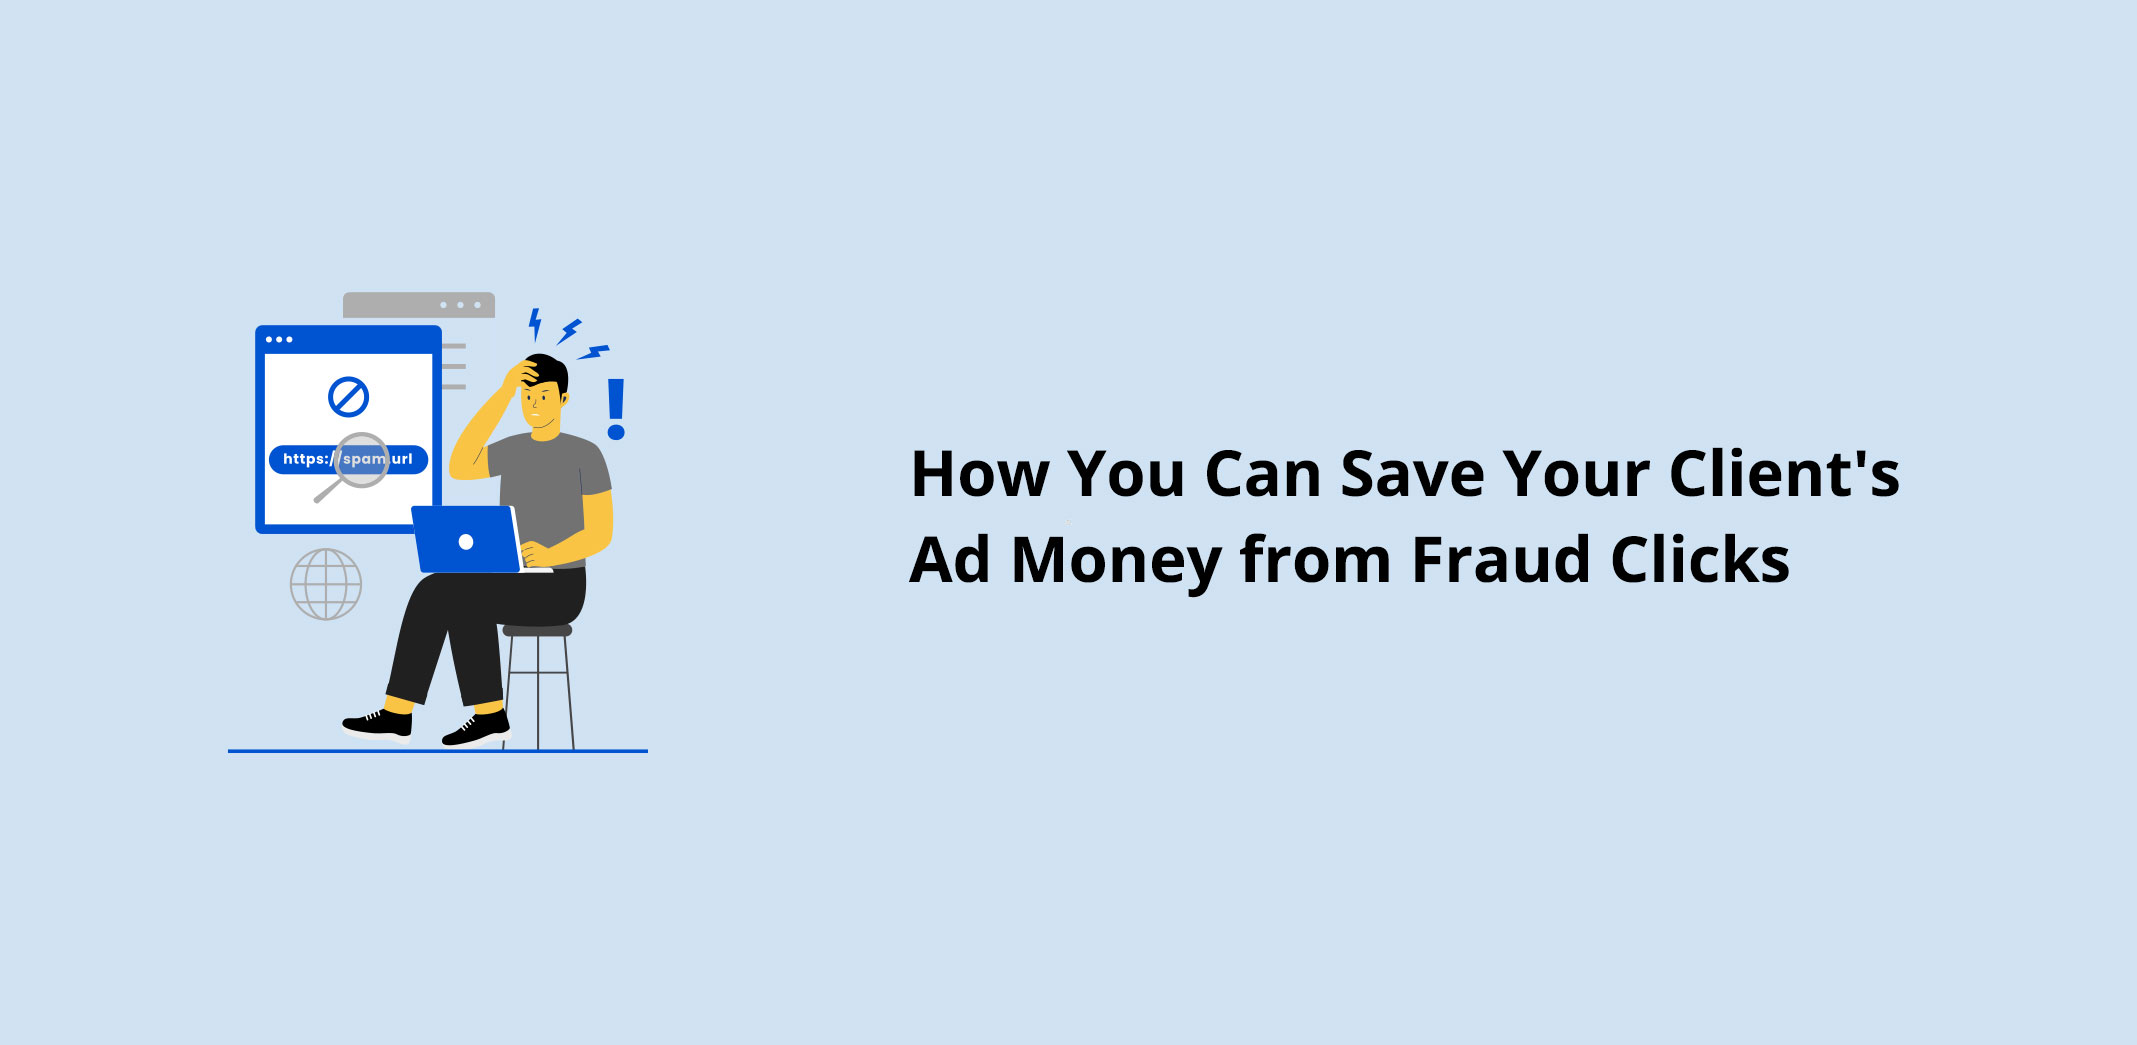 How You Can Save Your Client’s Ad Money from Fraud Clicks